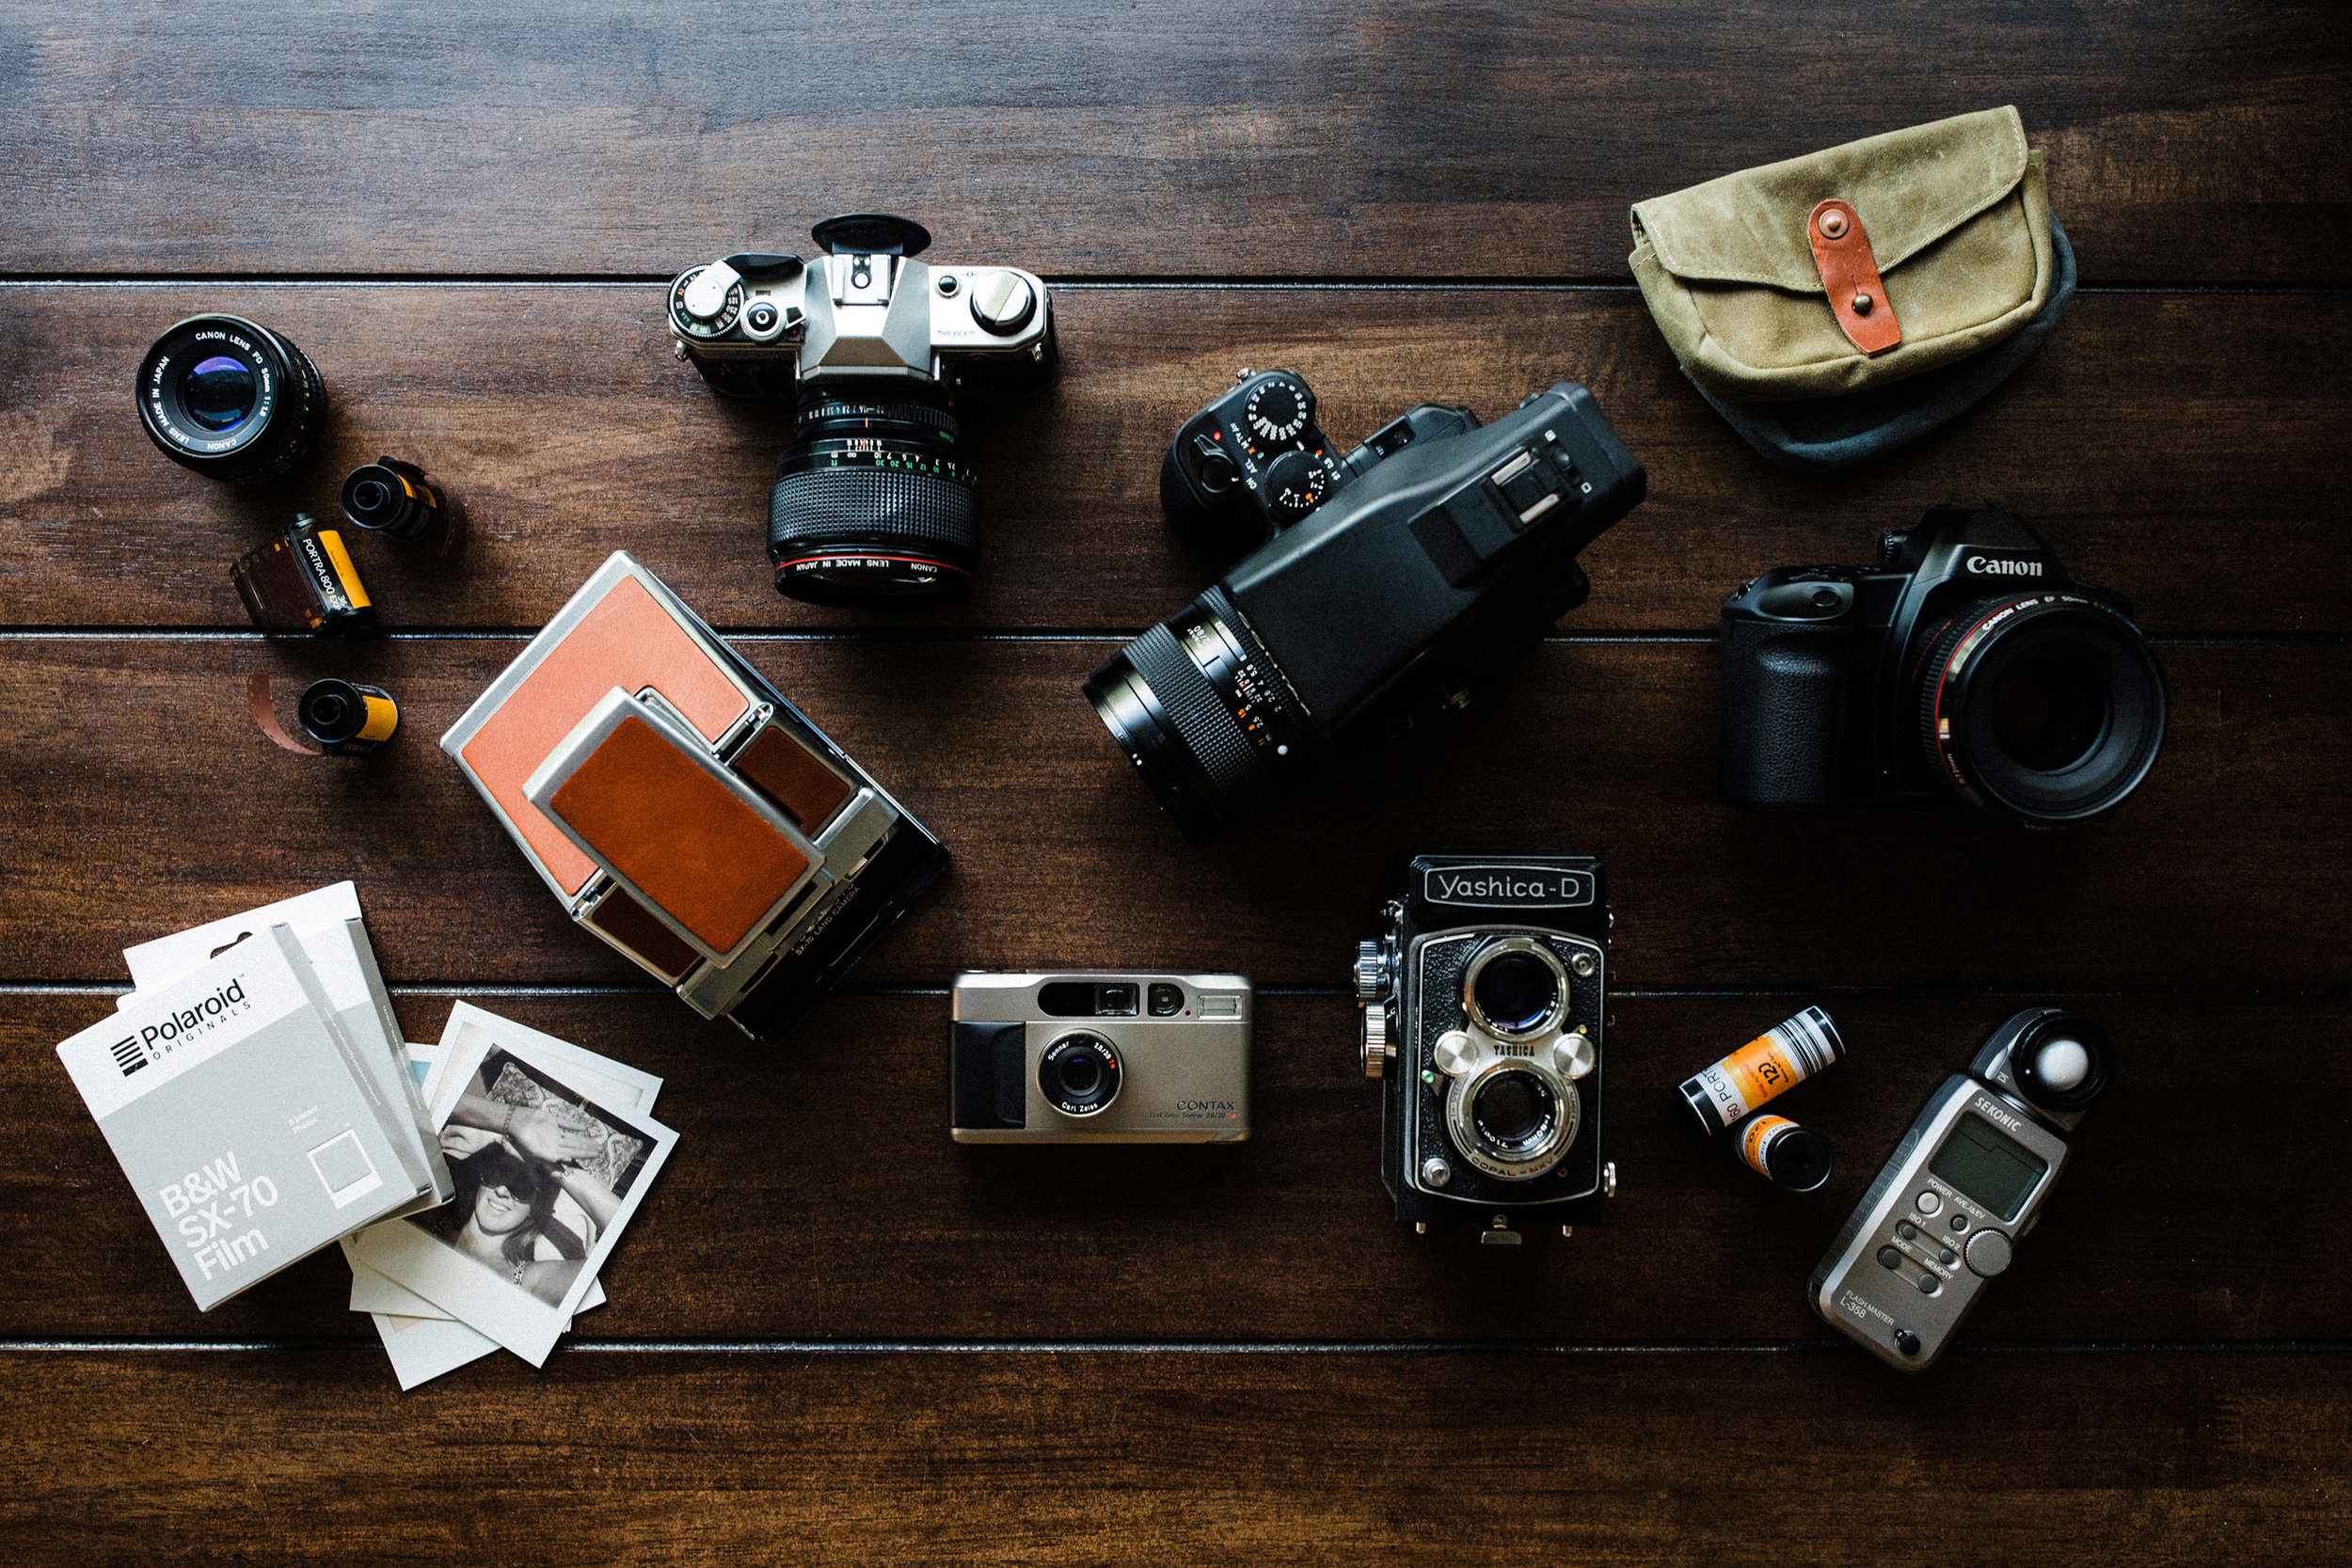 Find out why this Kodak film camera was my best travel purchase last year